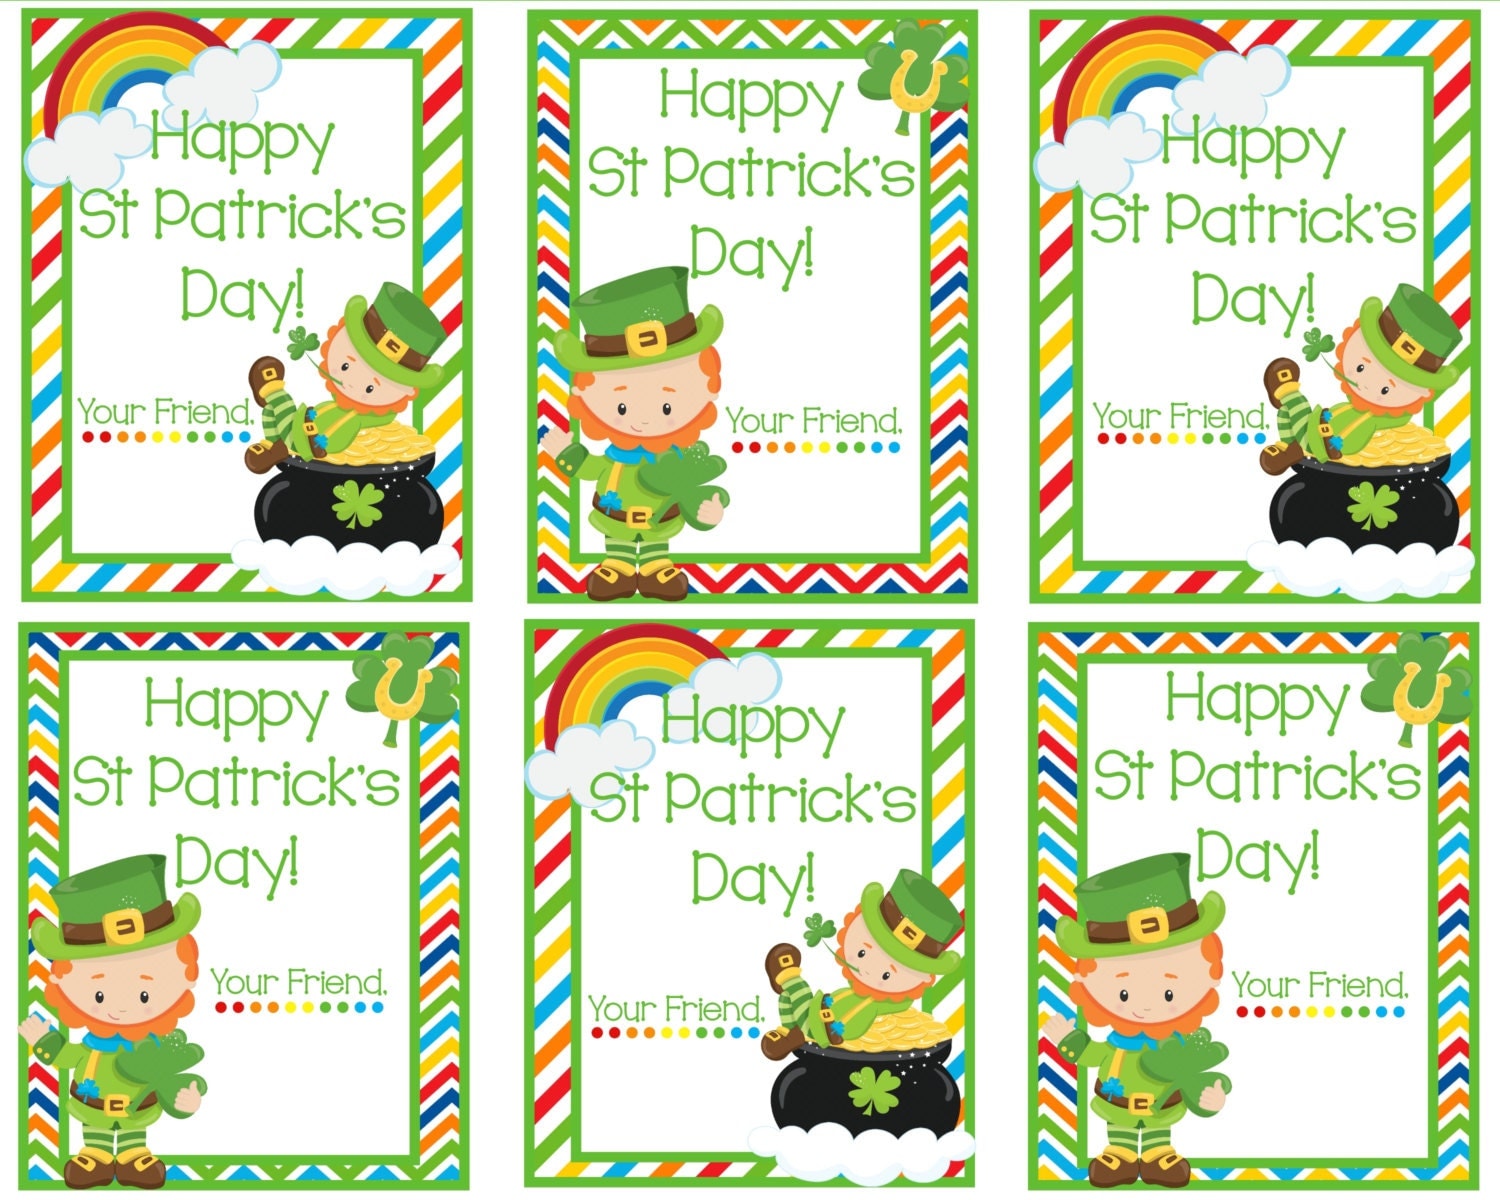 Printable Happy St Patrick's Day Cards Instant Download